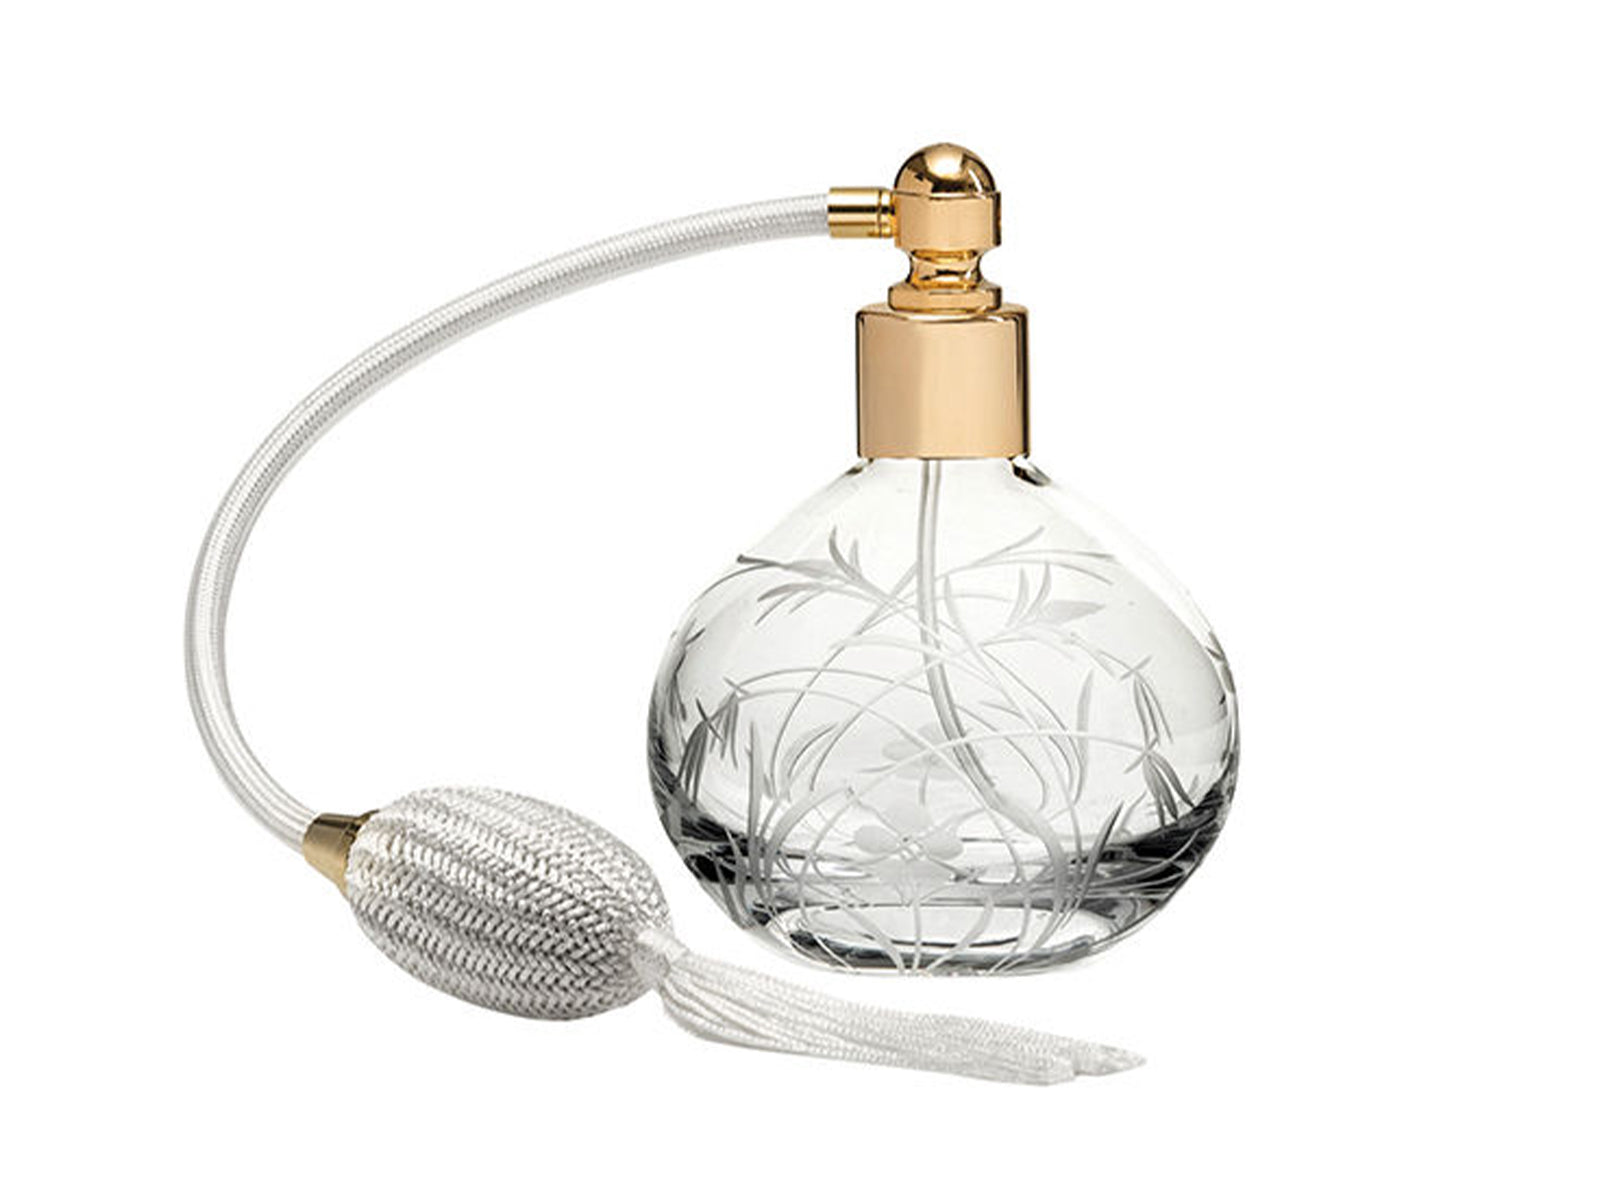 A round crystal perfume bottle with a gold lid and a cream atomiser. It has a wildflower design cut into the exterior, giving a frosted effect.